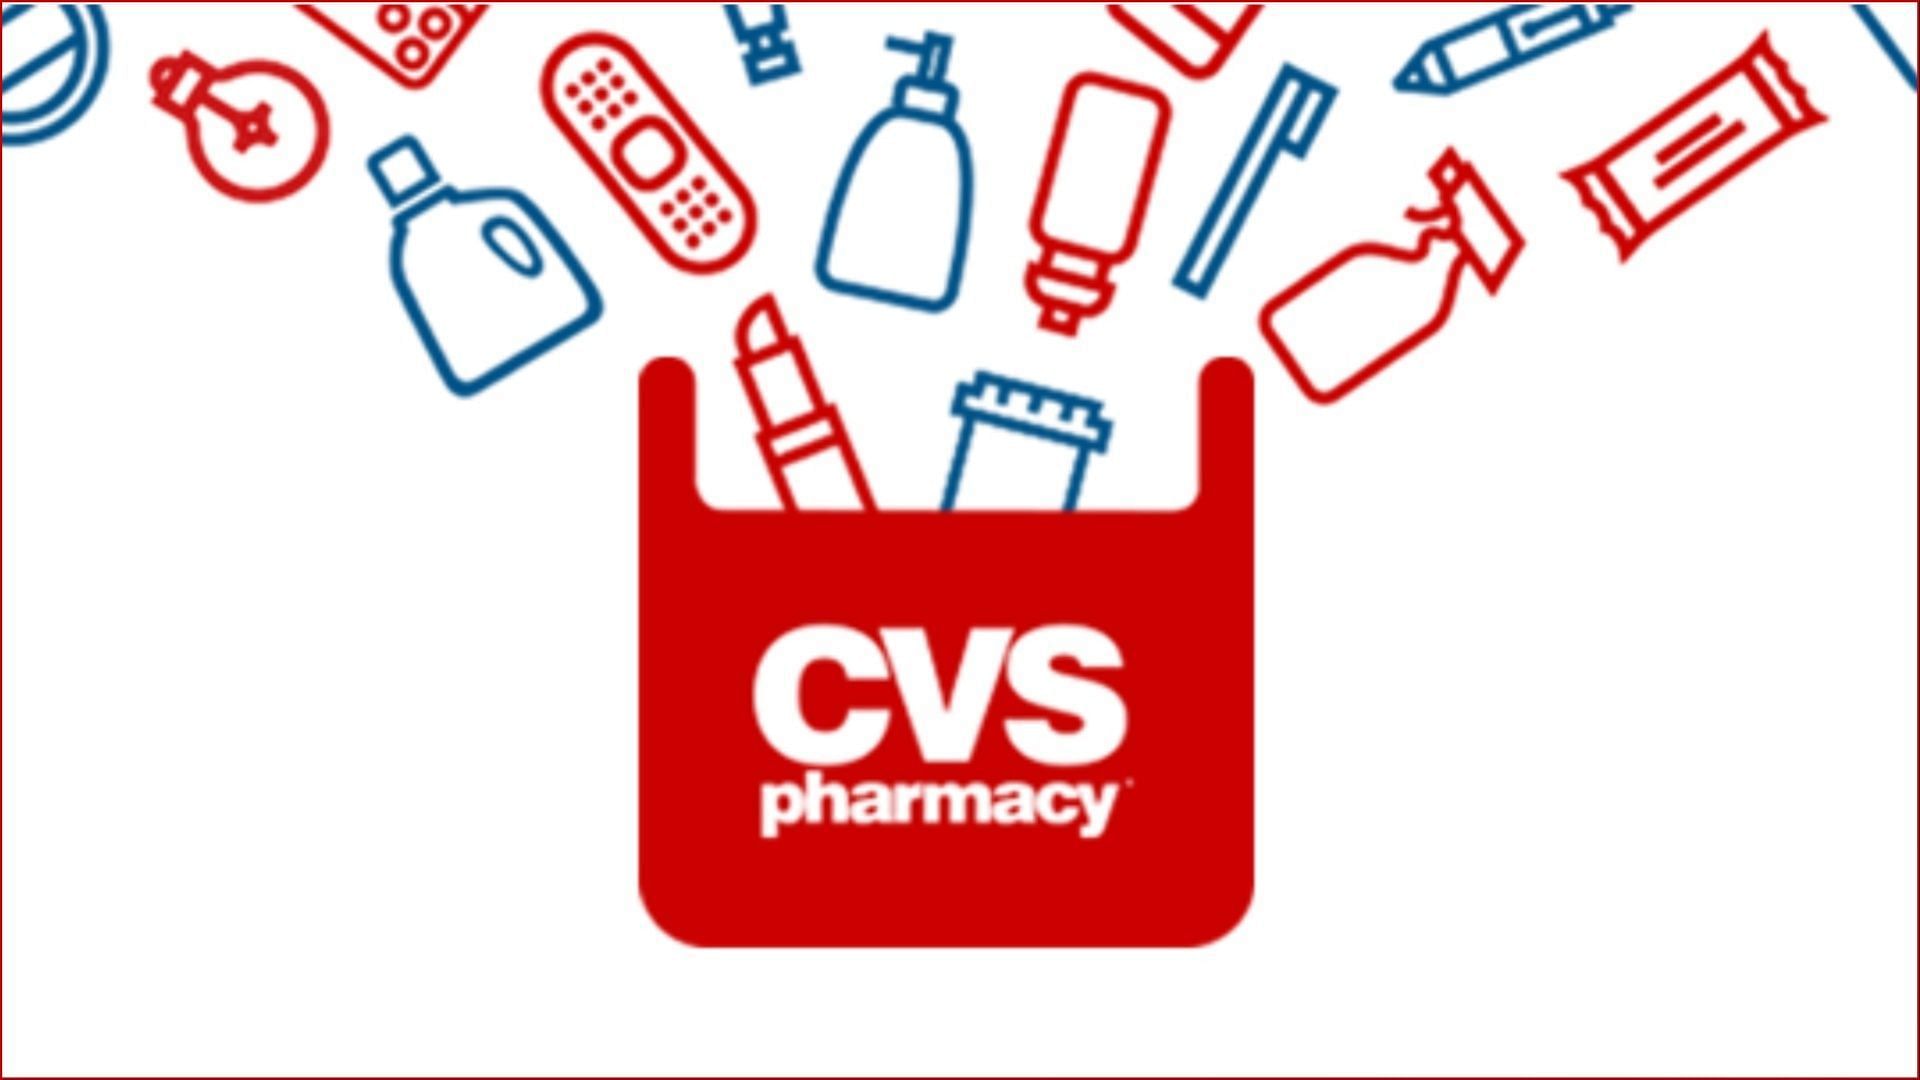 CVS is closing down several locations as a cost-cutting measure (Image via CVS Pharmacy)